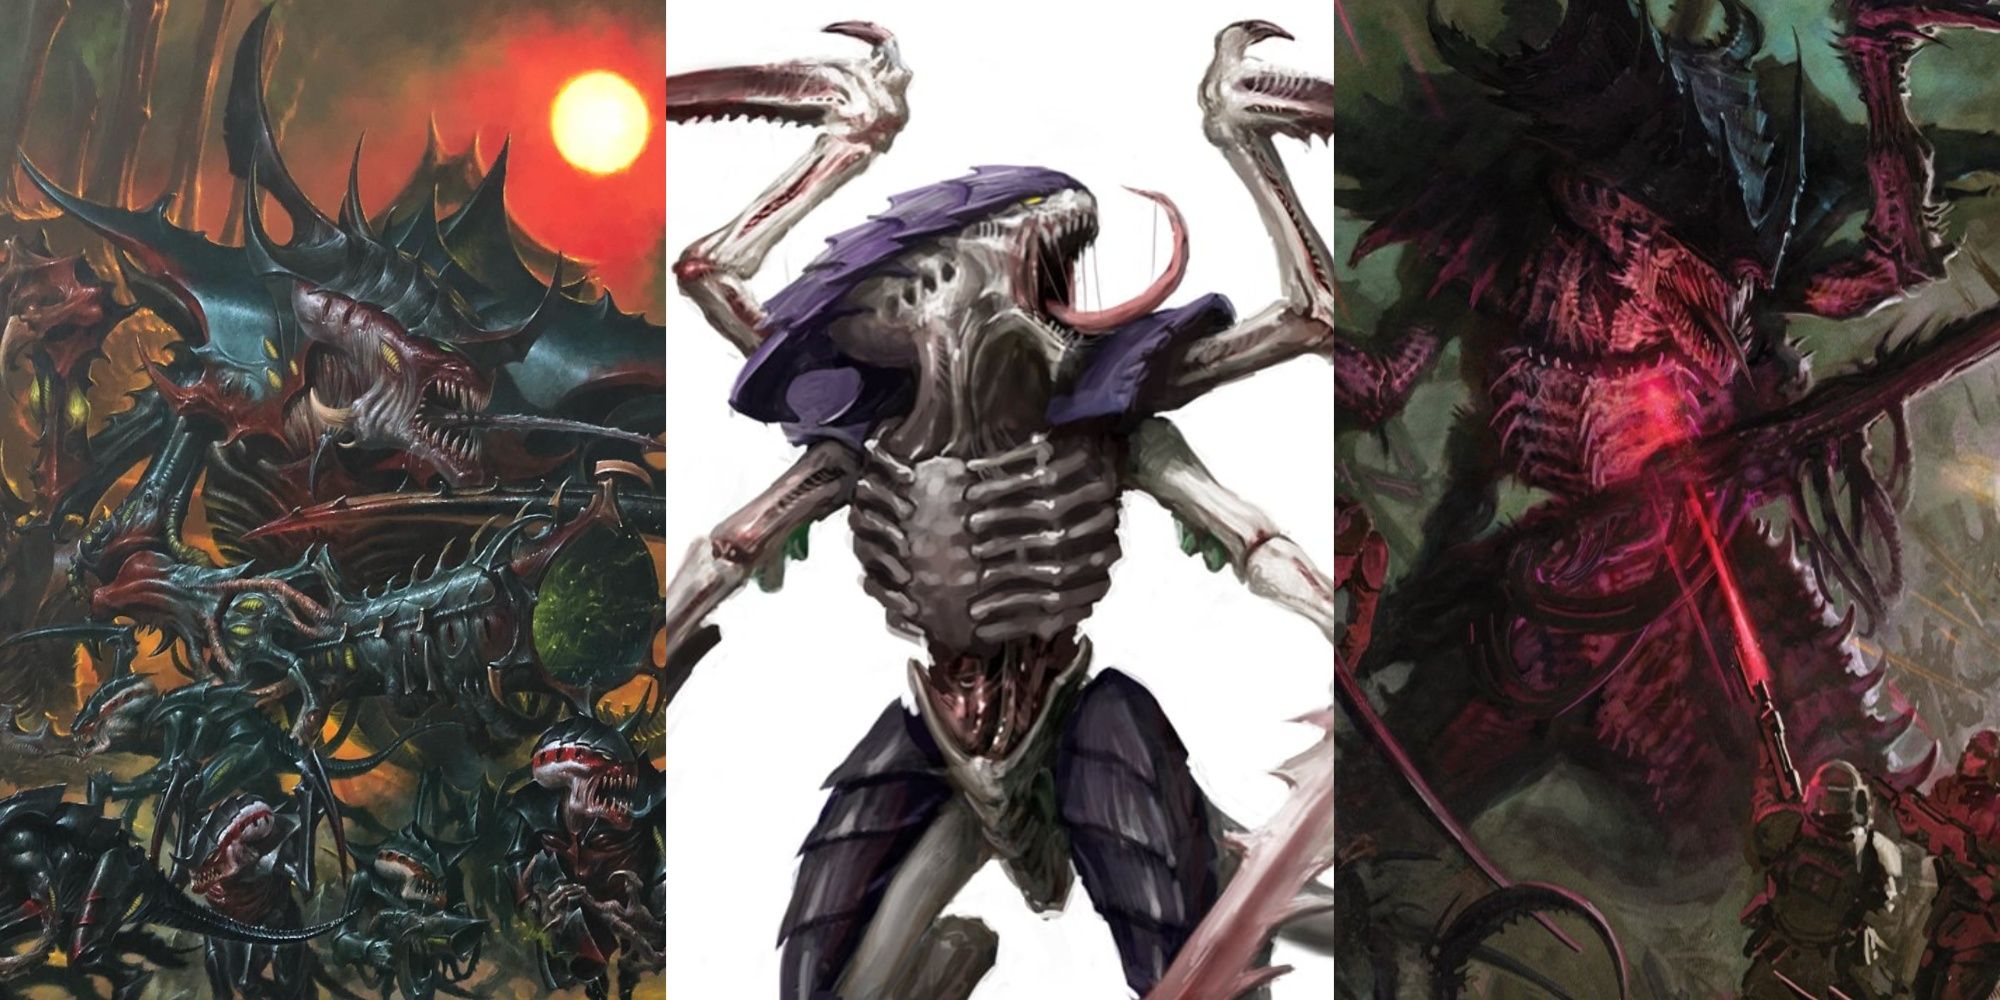 Various Tyranid bioforms together in a collage